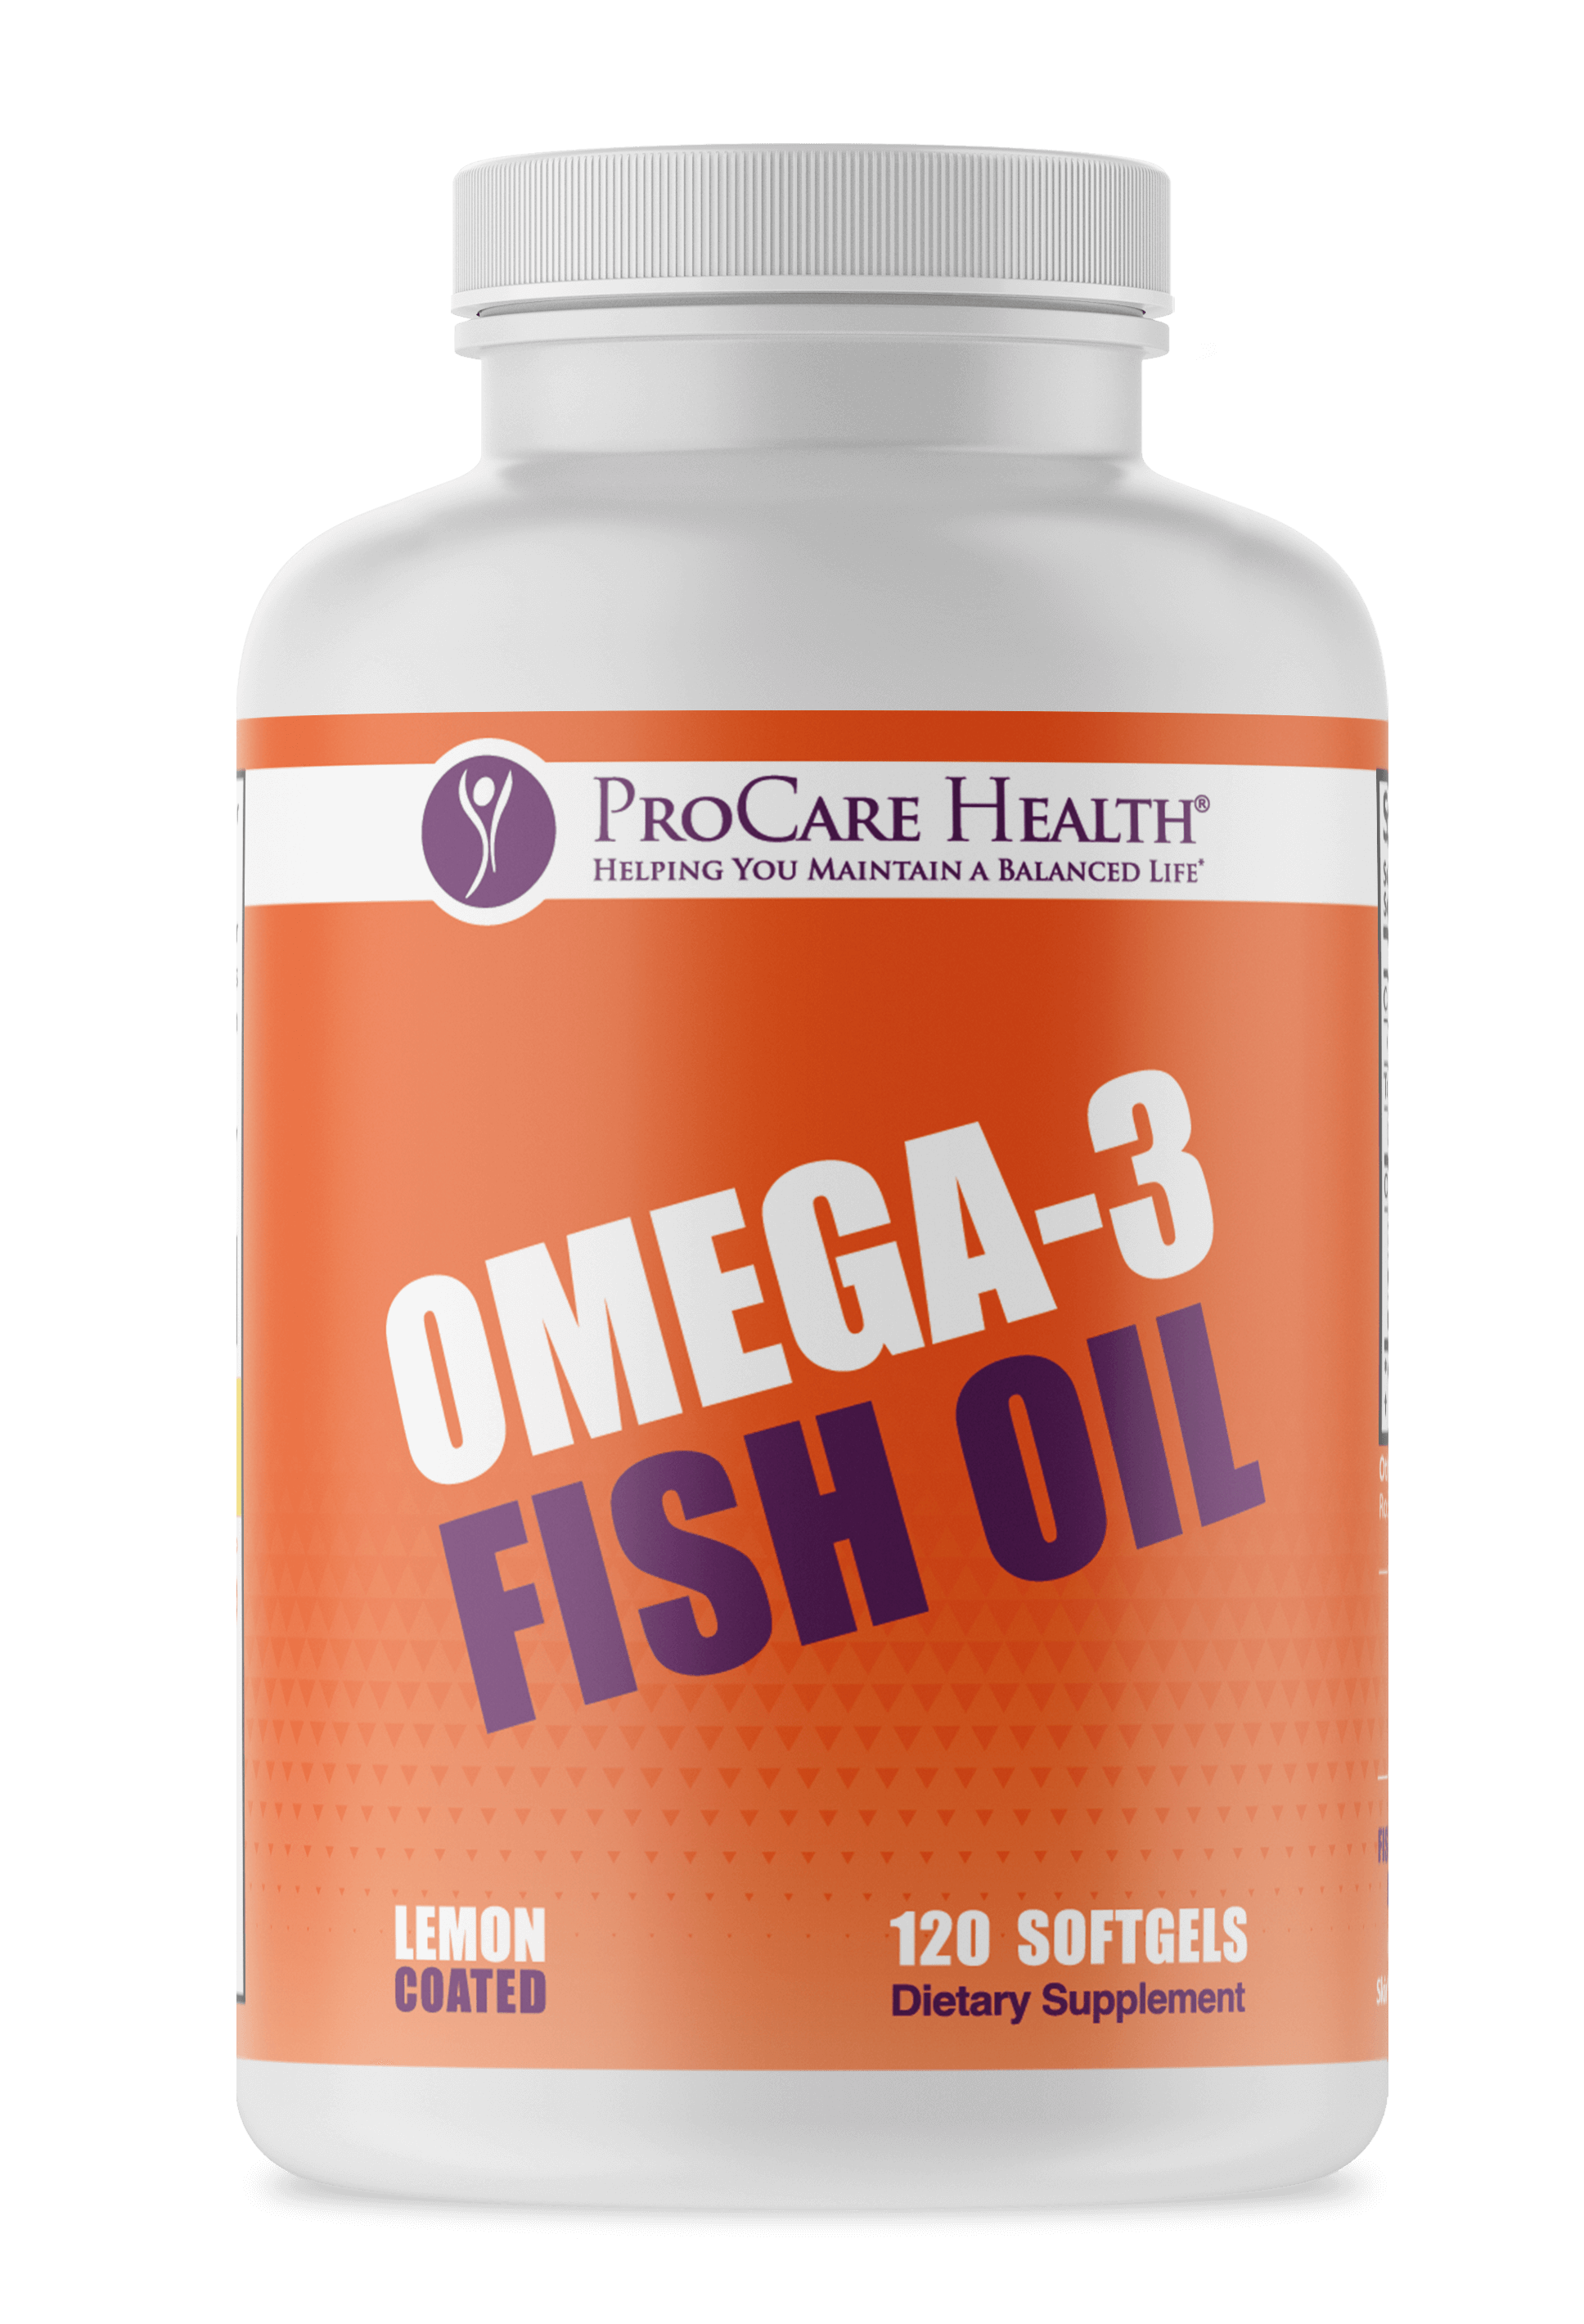 Omega- for overall well-being